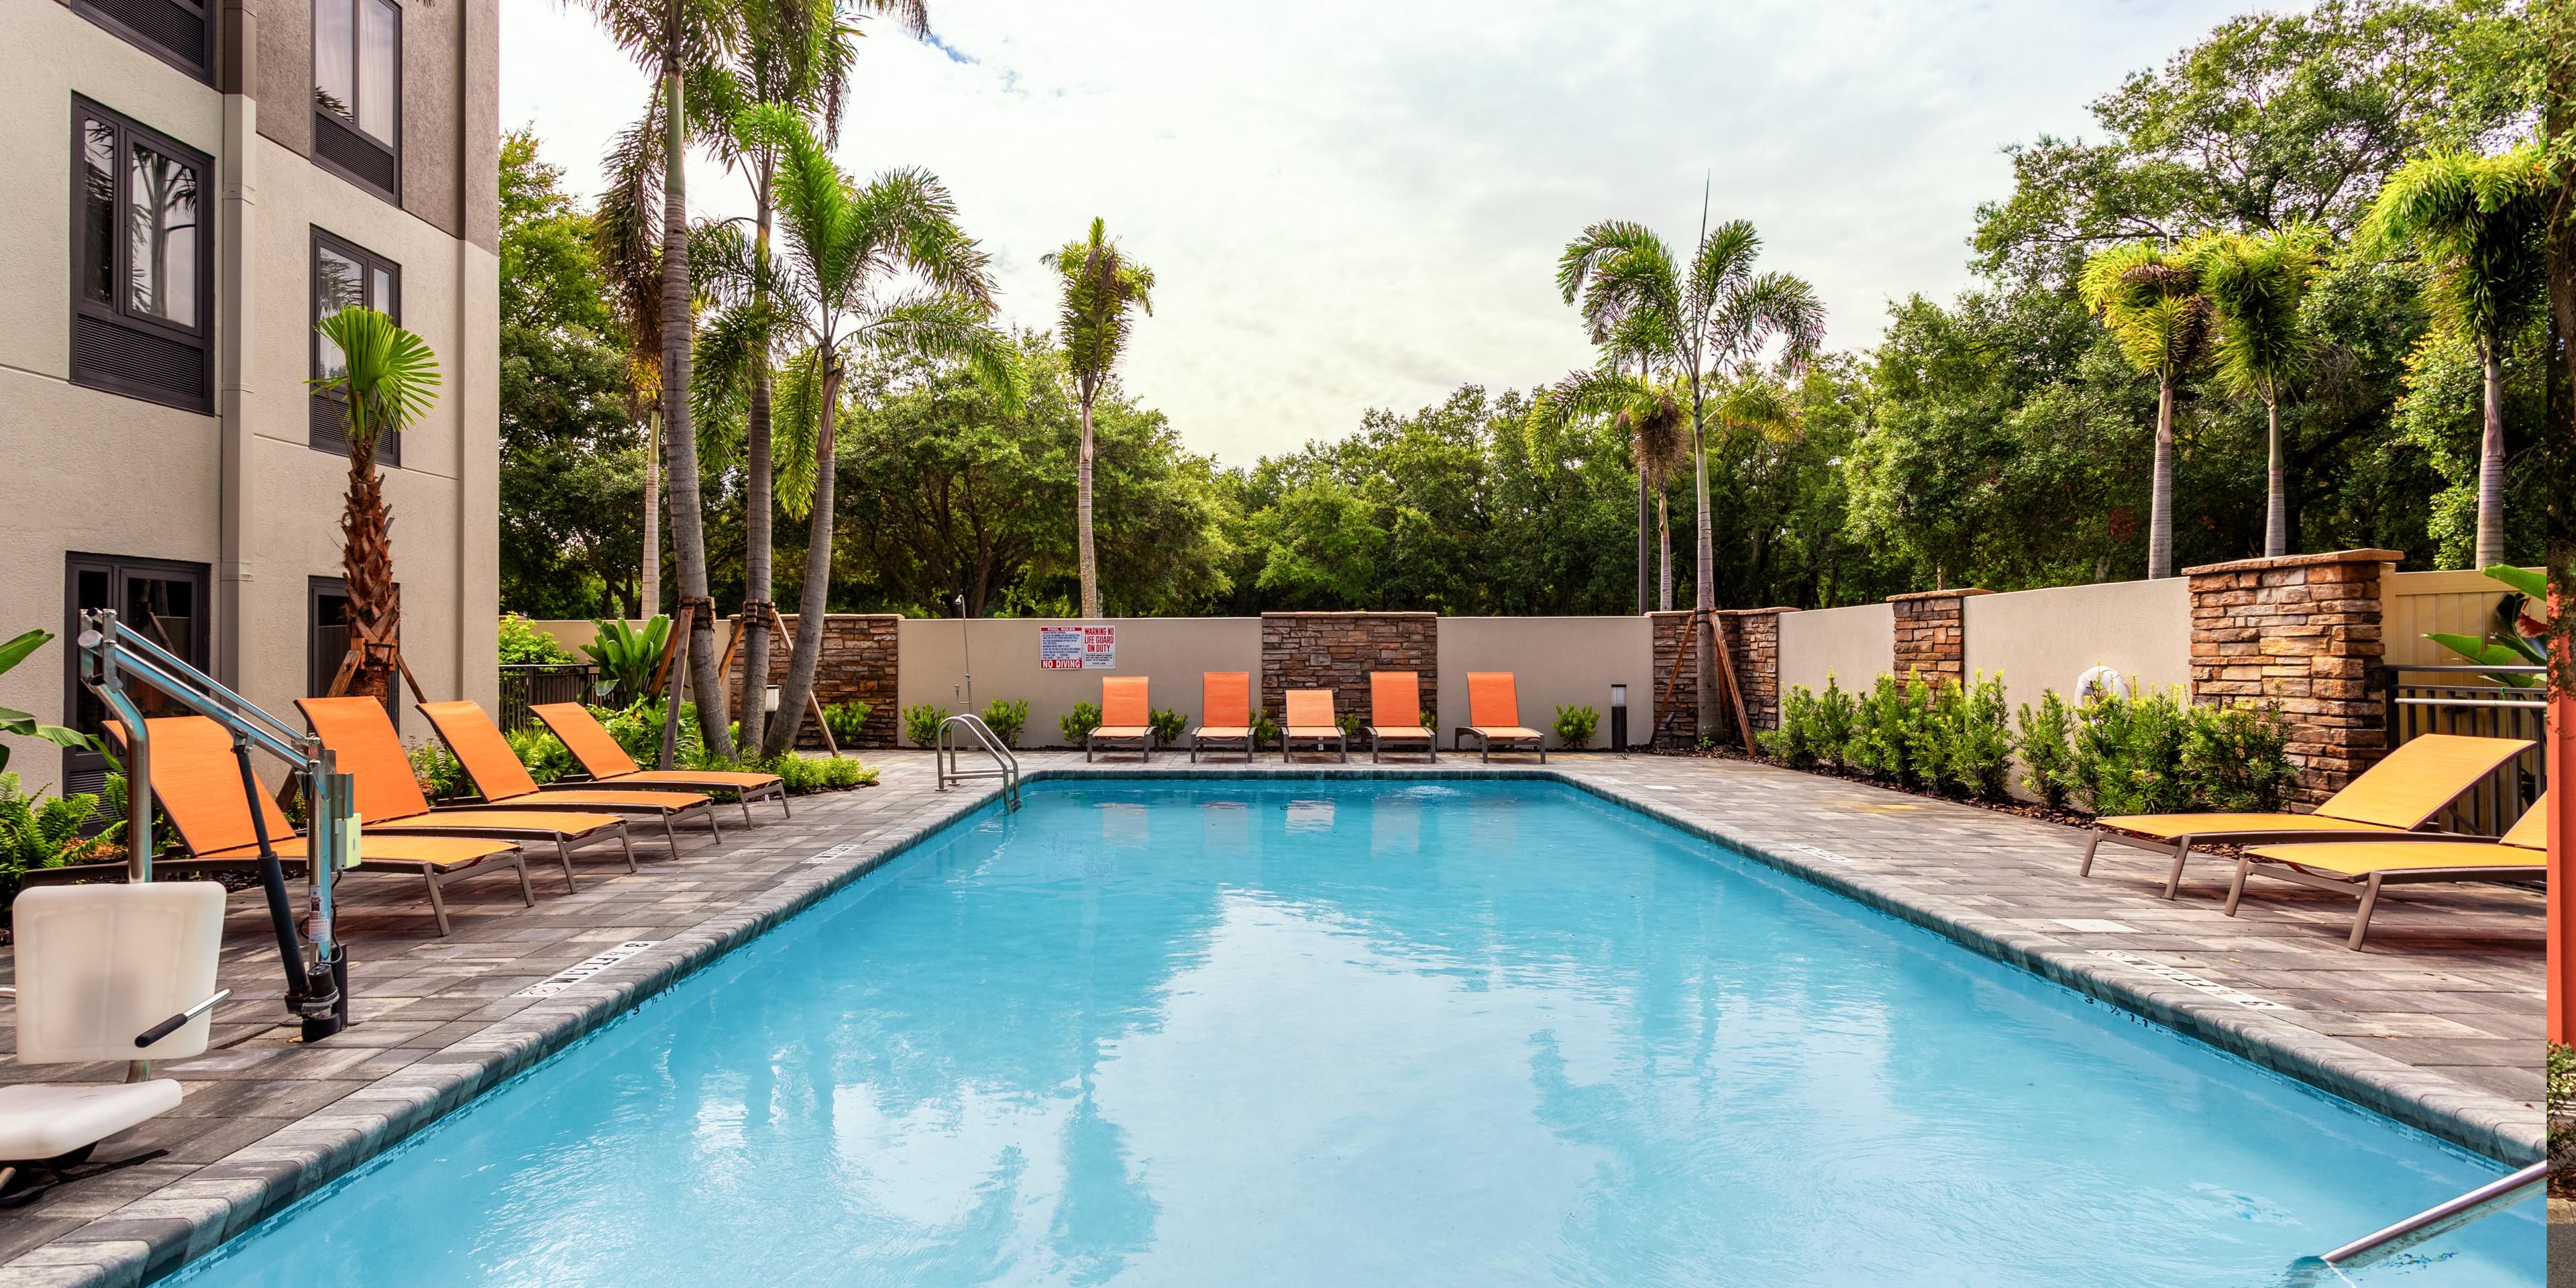 Relax in the Florida sunshine in our outdoor oasis.